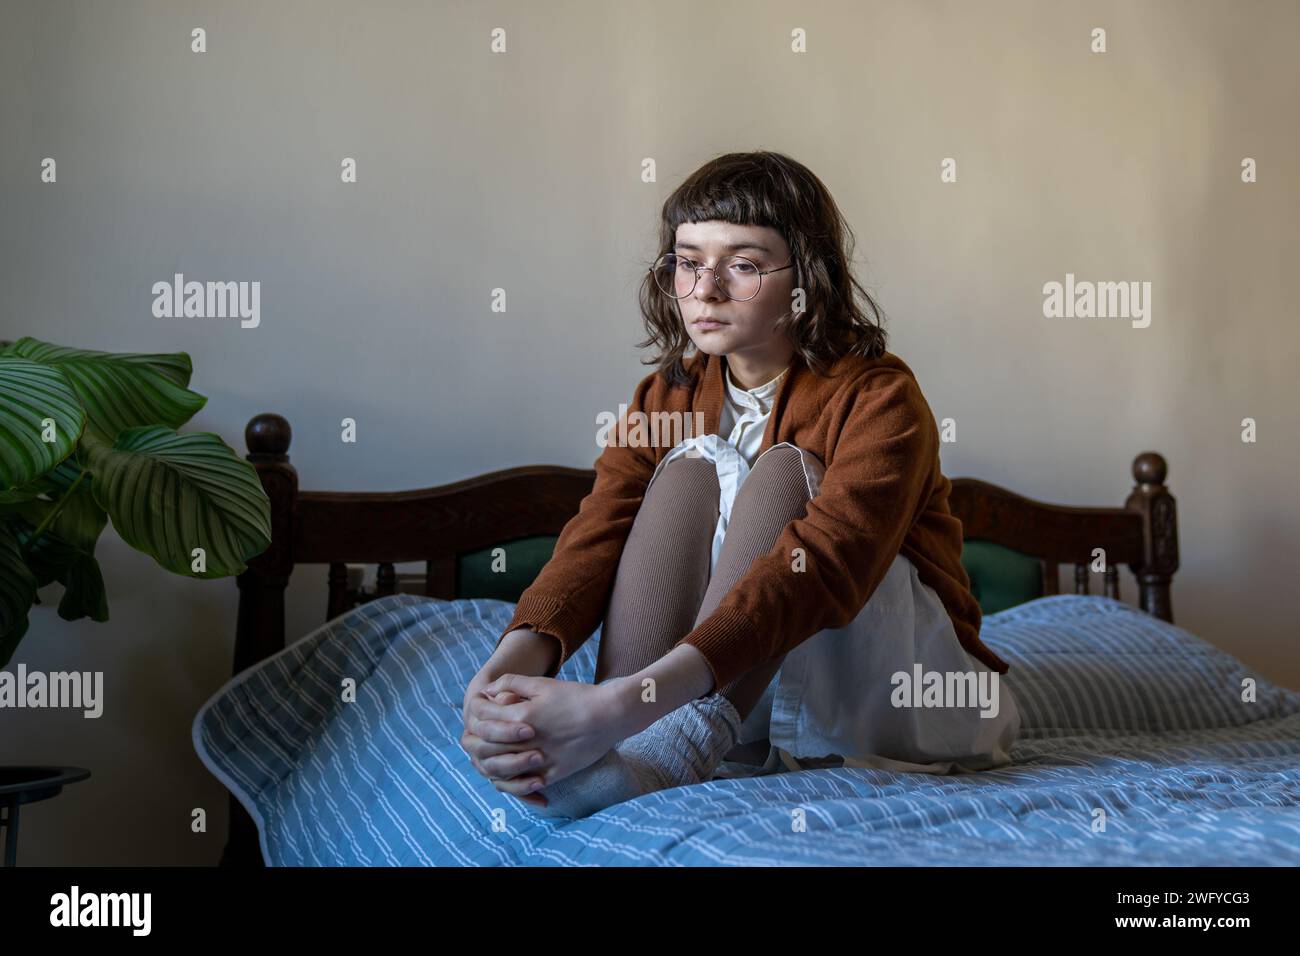 Sad upset teen girl in puberty period sitting on bed feeling procrastination, depression, loneliness Stock Photo